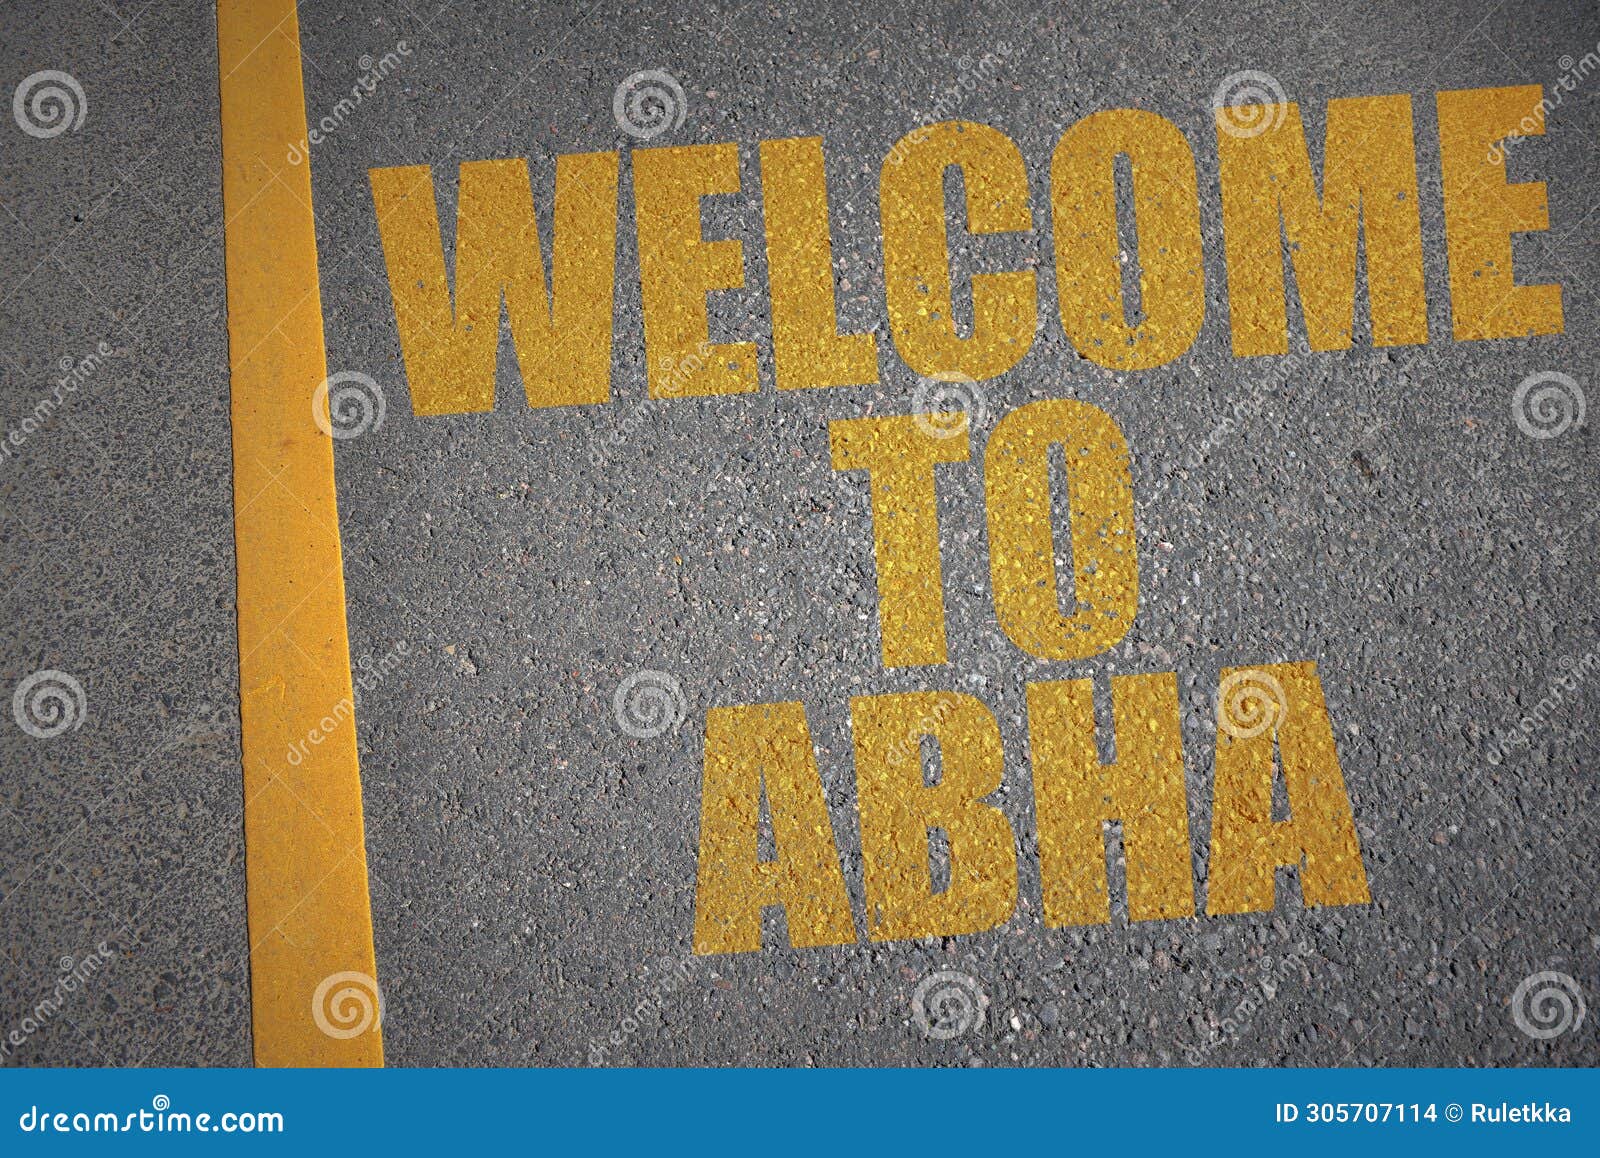 asphalt road with text welcome to abha near yellow line